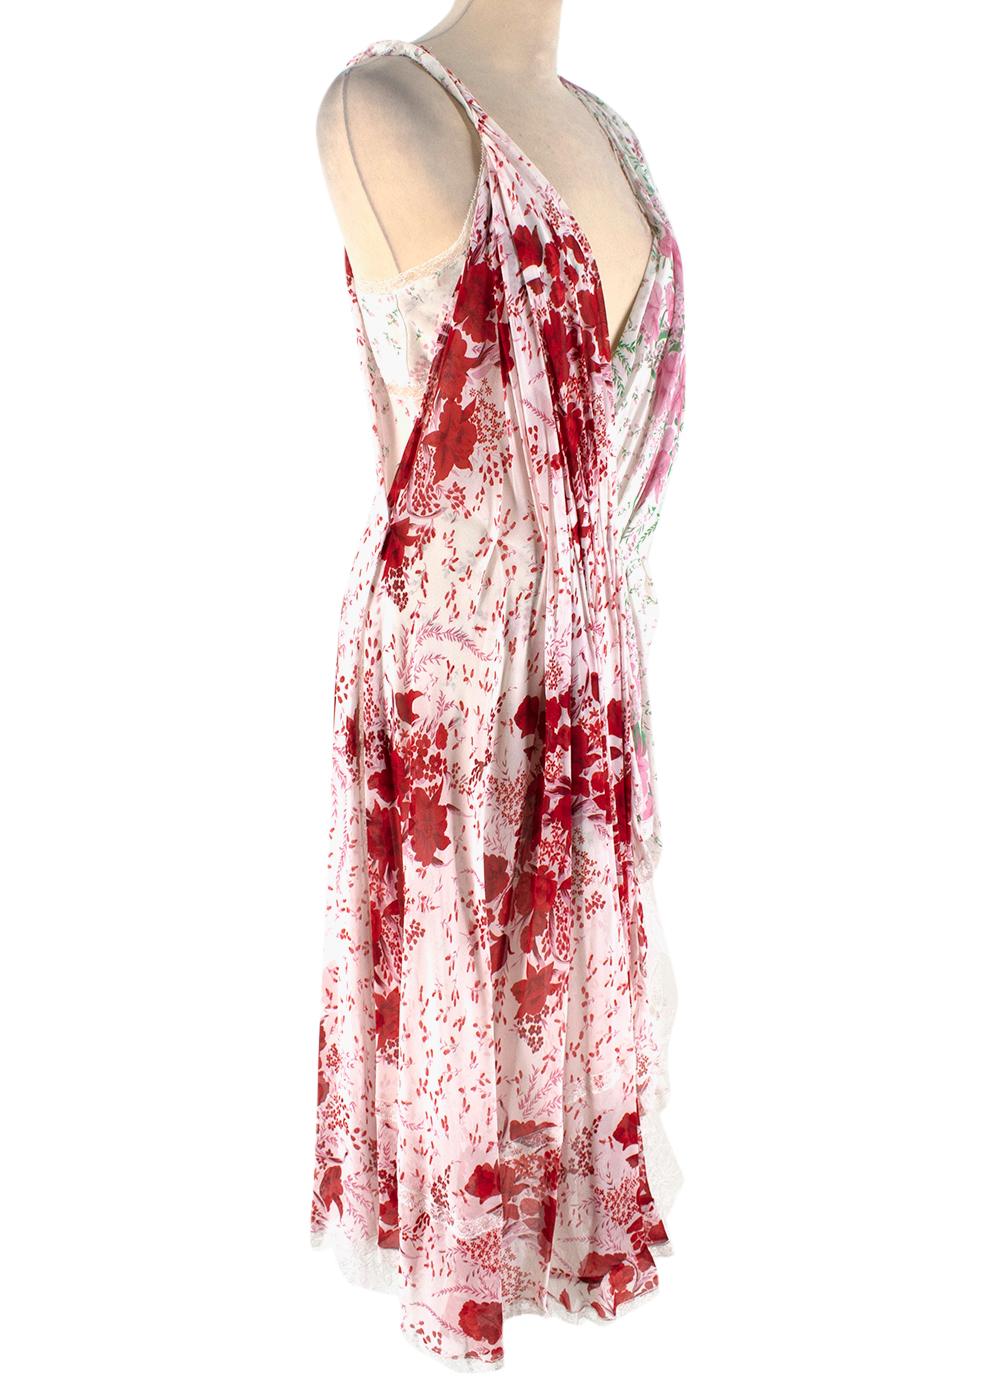 Asymmetric Floral Dress In White

White, pink, green and red silk blend asymmetric floral dress from Ermanno Scervino.

Dry Clean Only

Made In Italy 

Measurements are taken with the item lying flat, seam to seam.
Length - 120cm
Chest - 38cm
